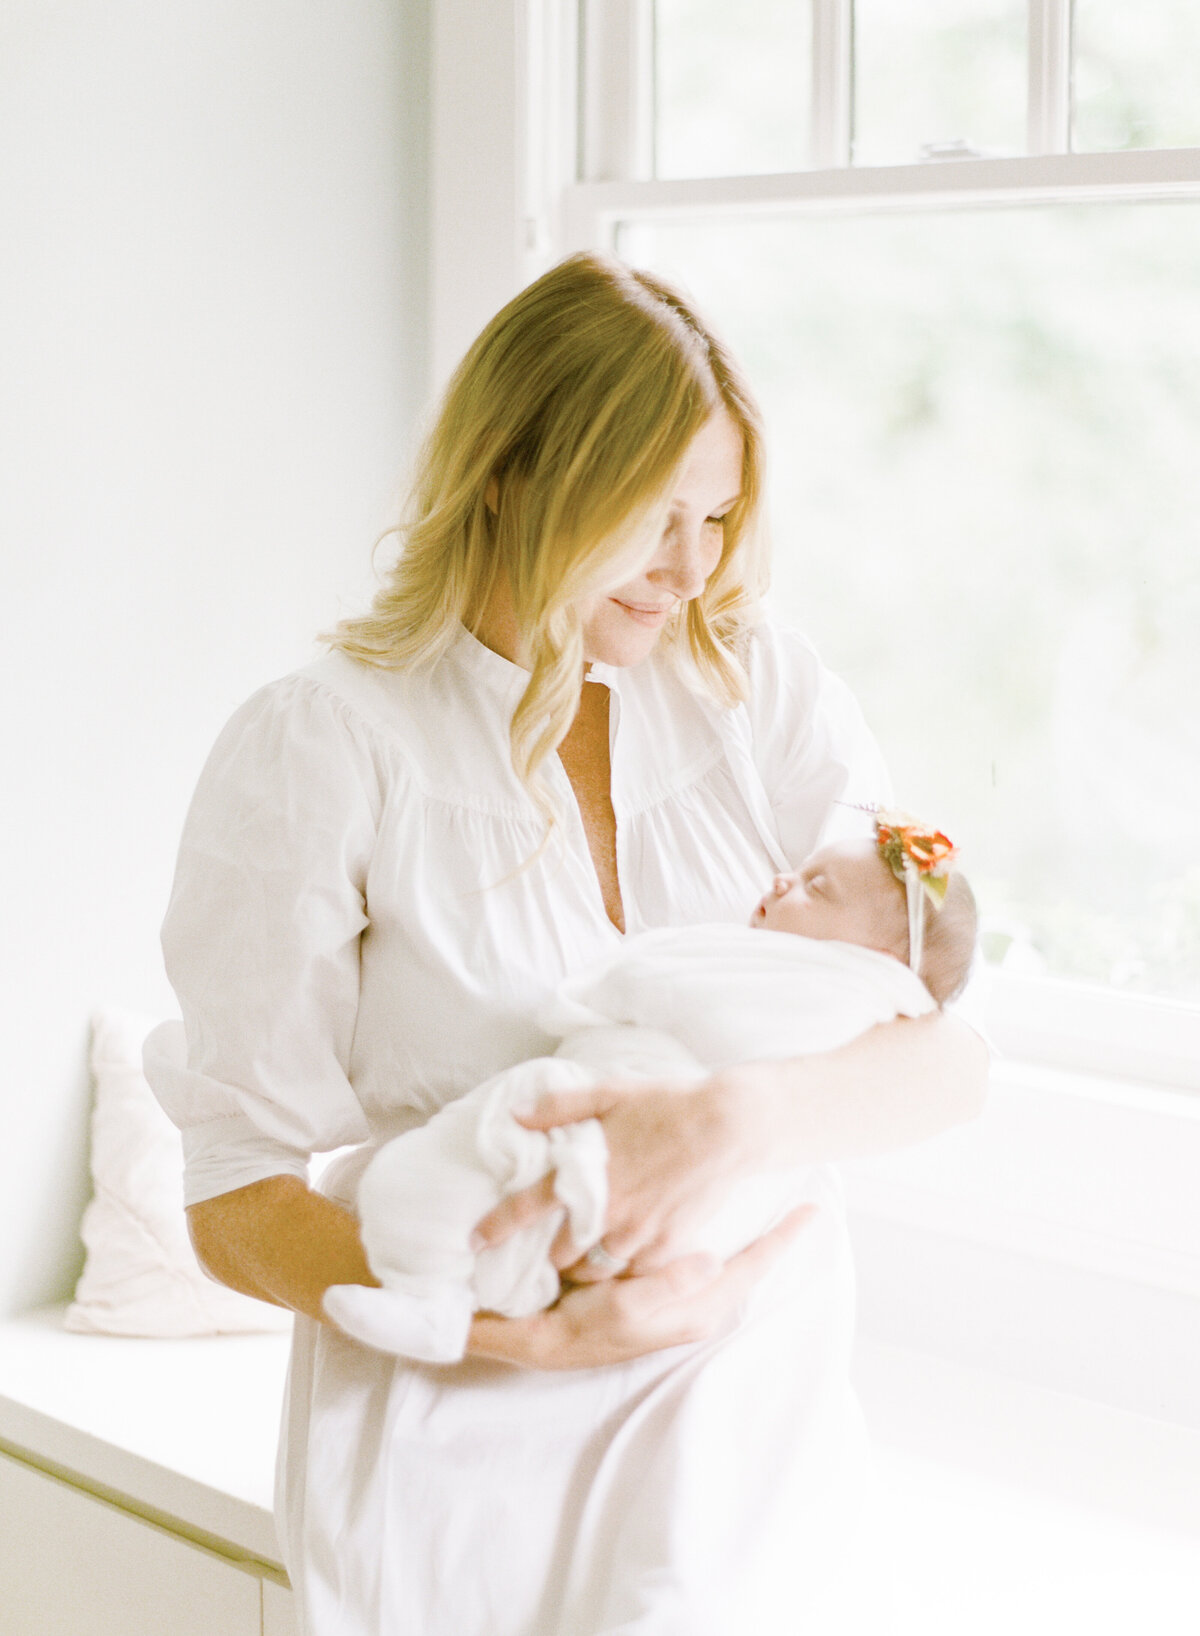 Mom sits and holds her newborn daughter in bright window light during their Raleigh newborn photography session. Photographed by Raleigh Newborn Photographer A.J. Dunlap Photography.